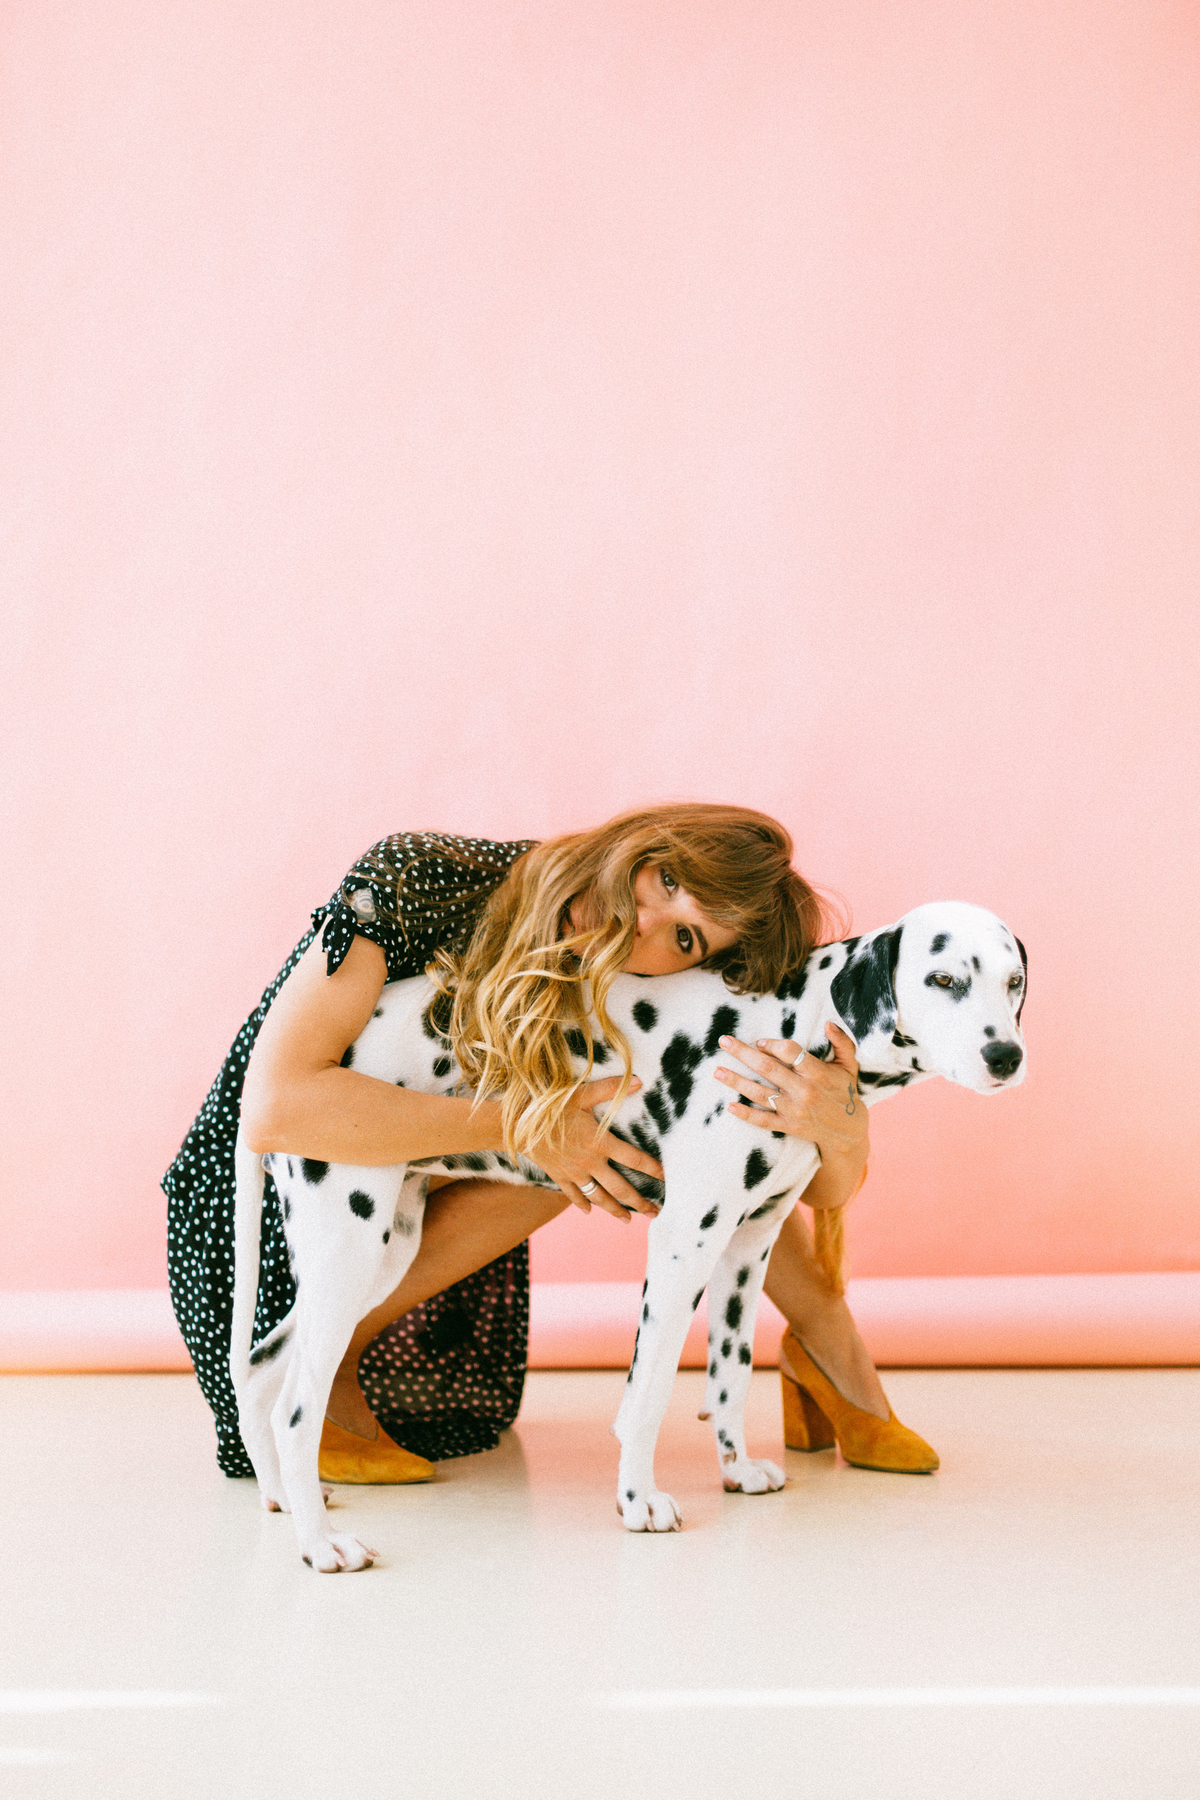 Author with her dalmatian